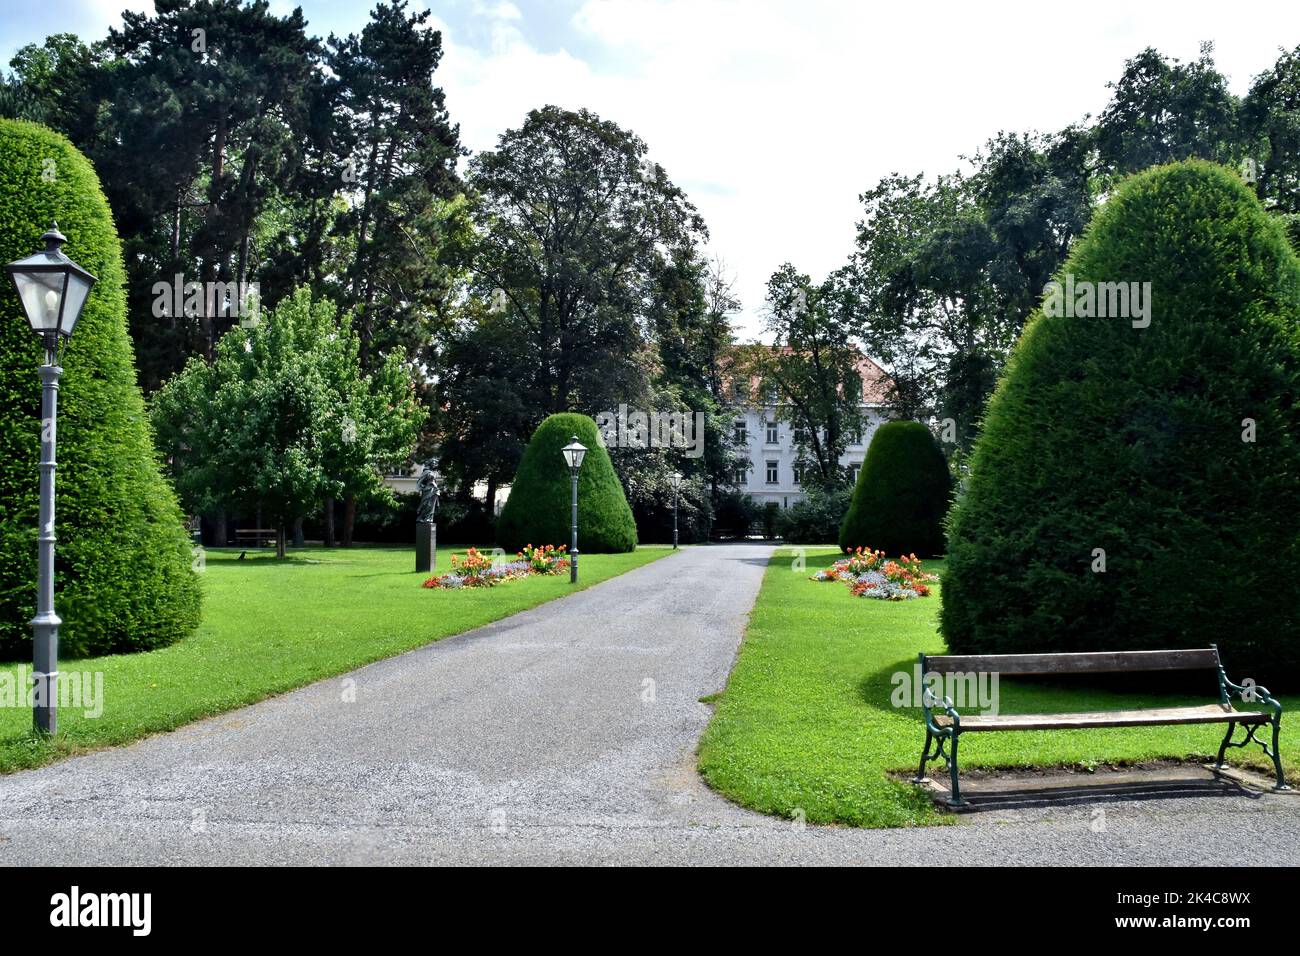 The view of decorated plants in a park before a building on a sunny day Stock Photo